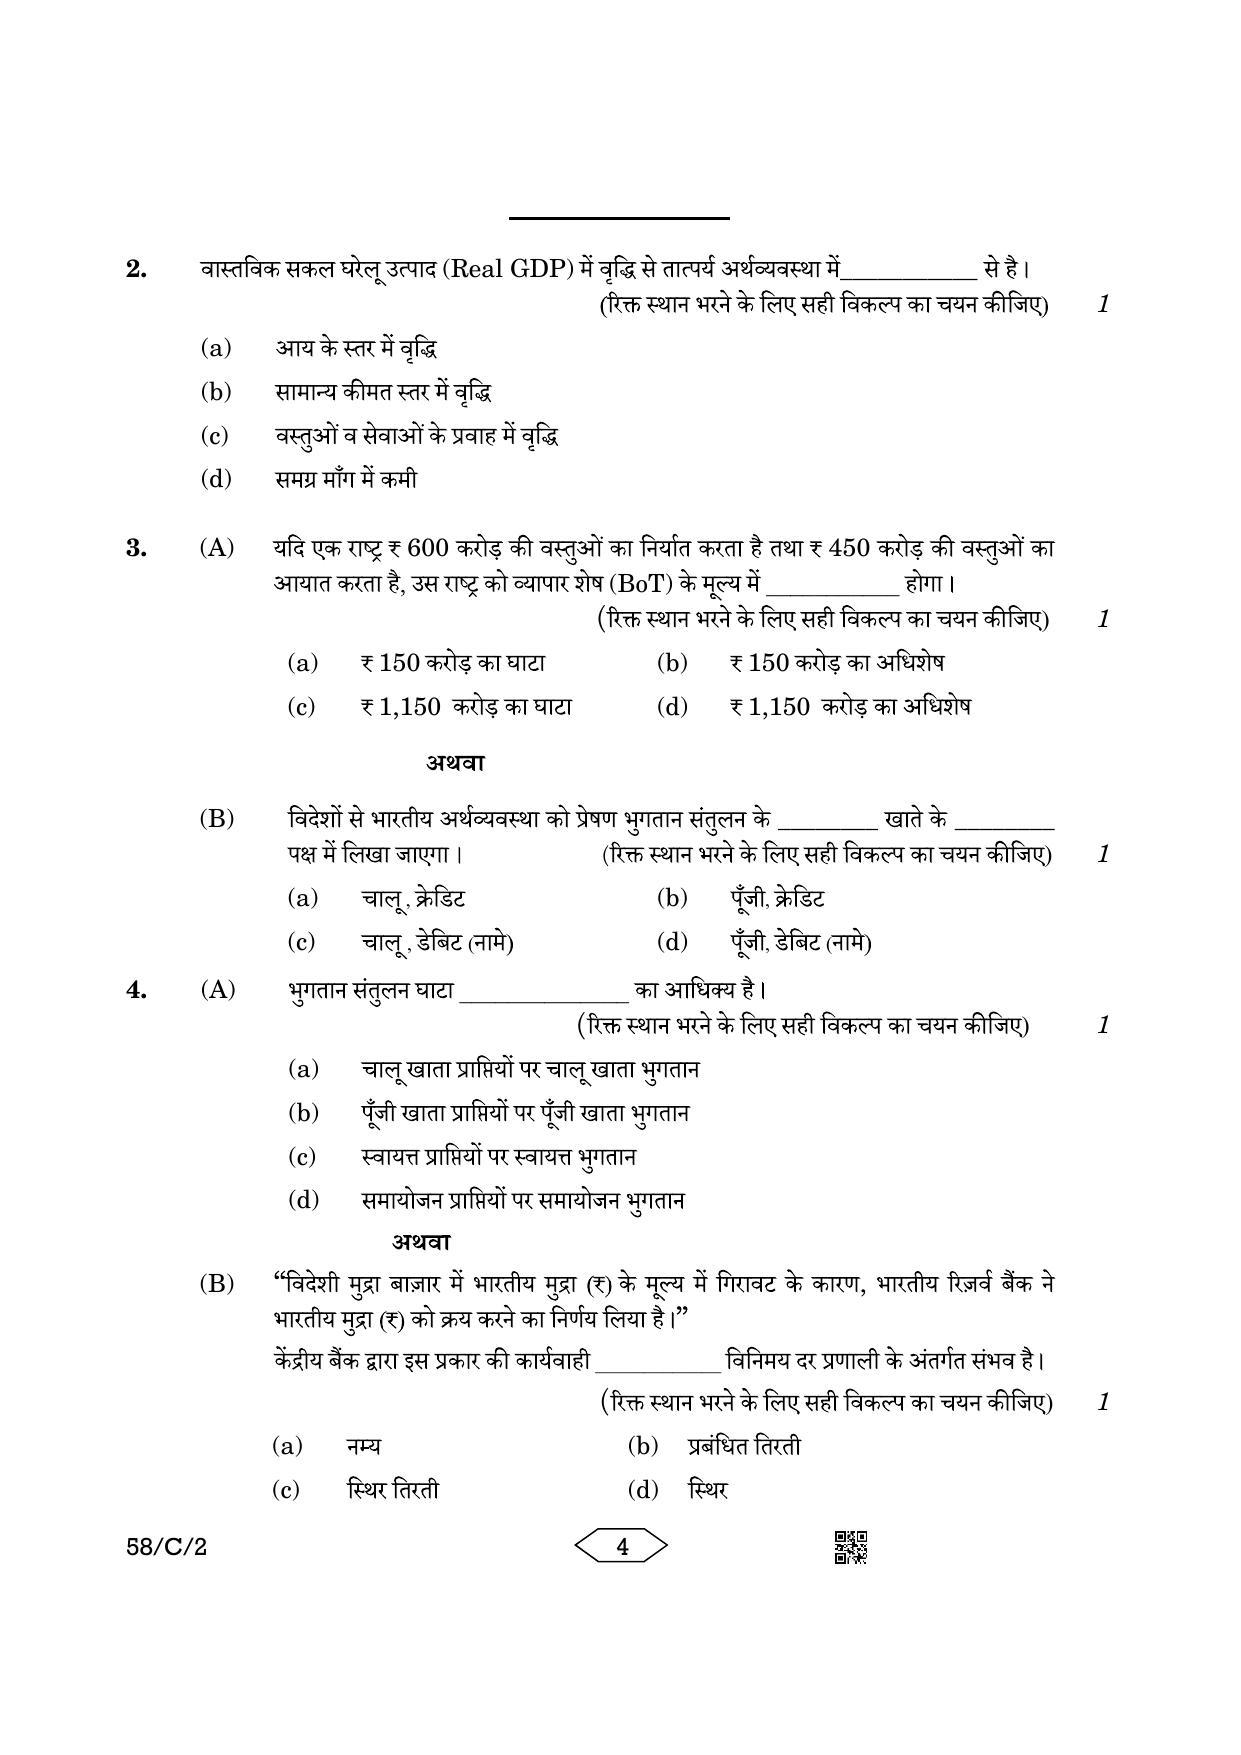 CBSE Class 12 58-2 Chemistry 2023 (Compartment) Question Paper - Page 4